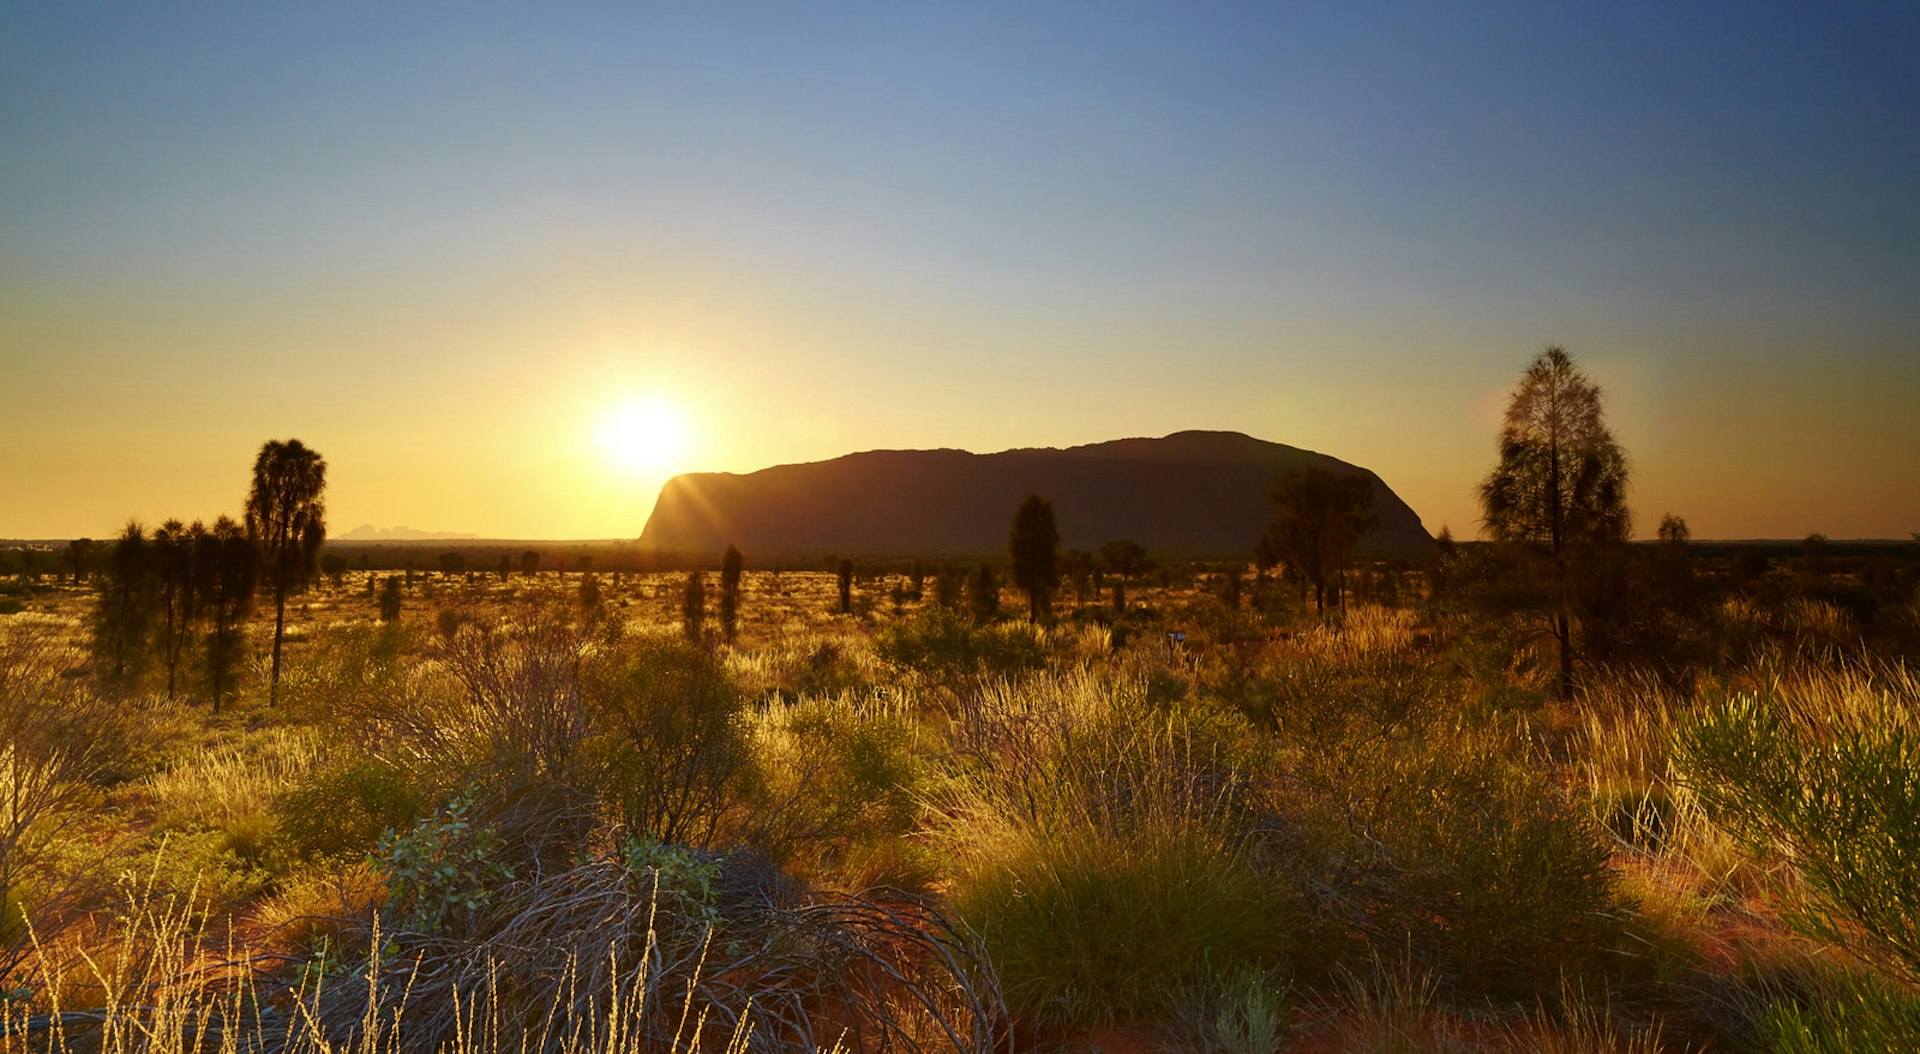 Sunrise at Uluru, in the heart of Australia's Outback. A plain of grass in the foreground stretches away towards the horizon and great limestone mass that is Uluru